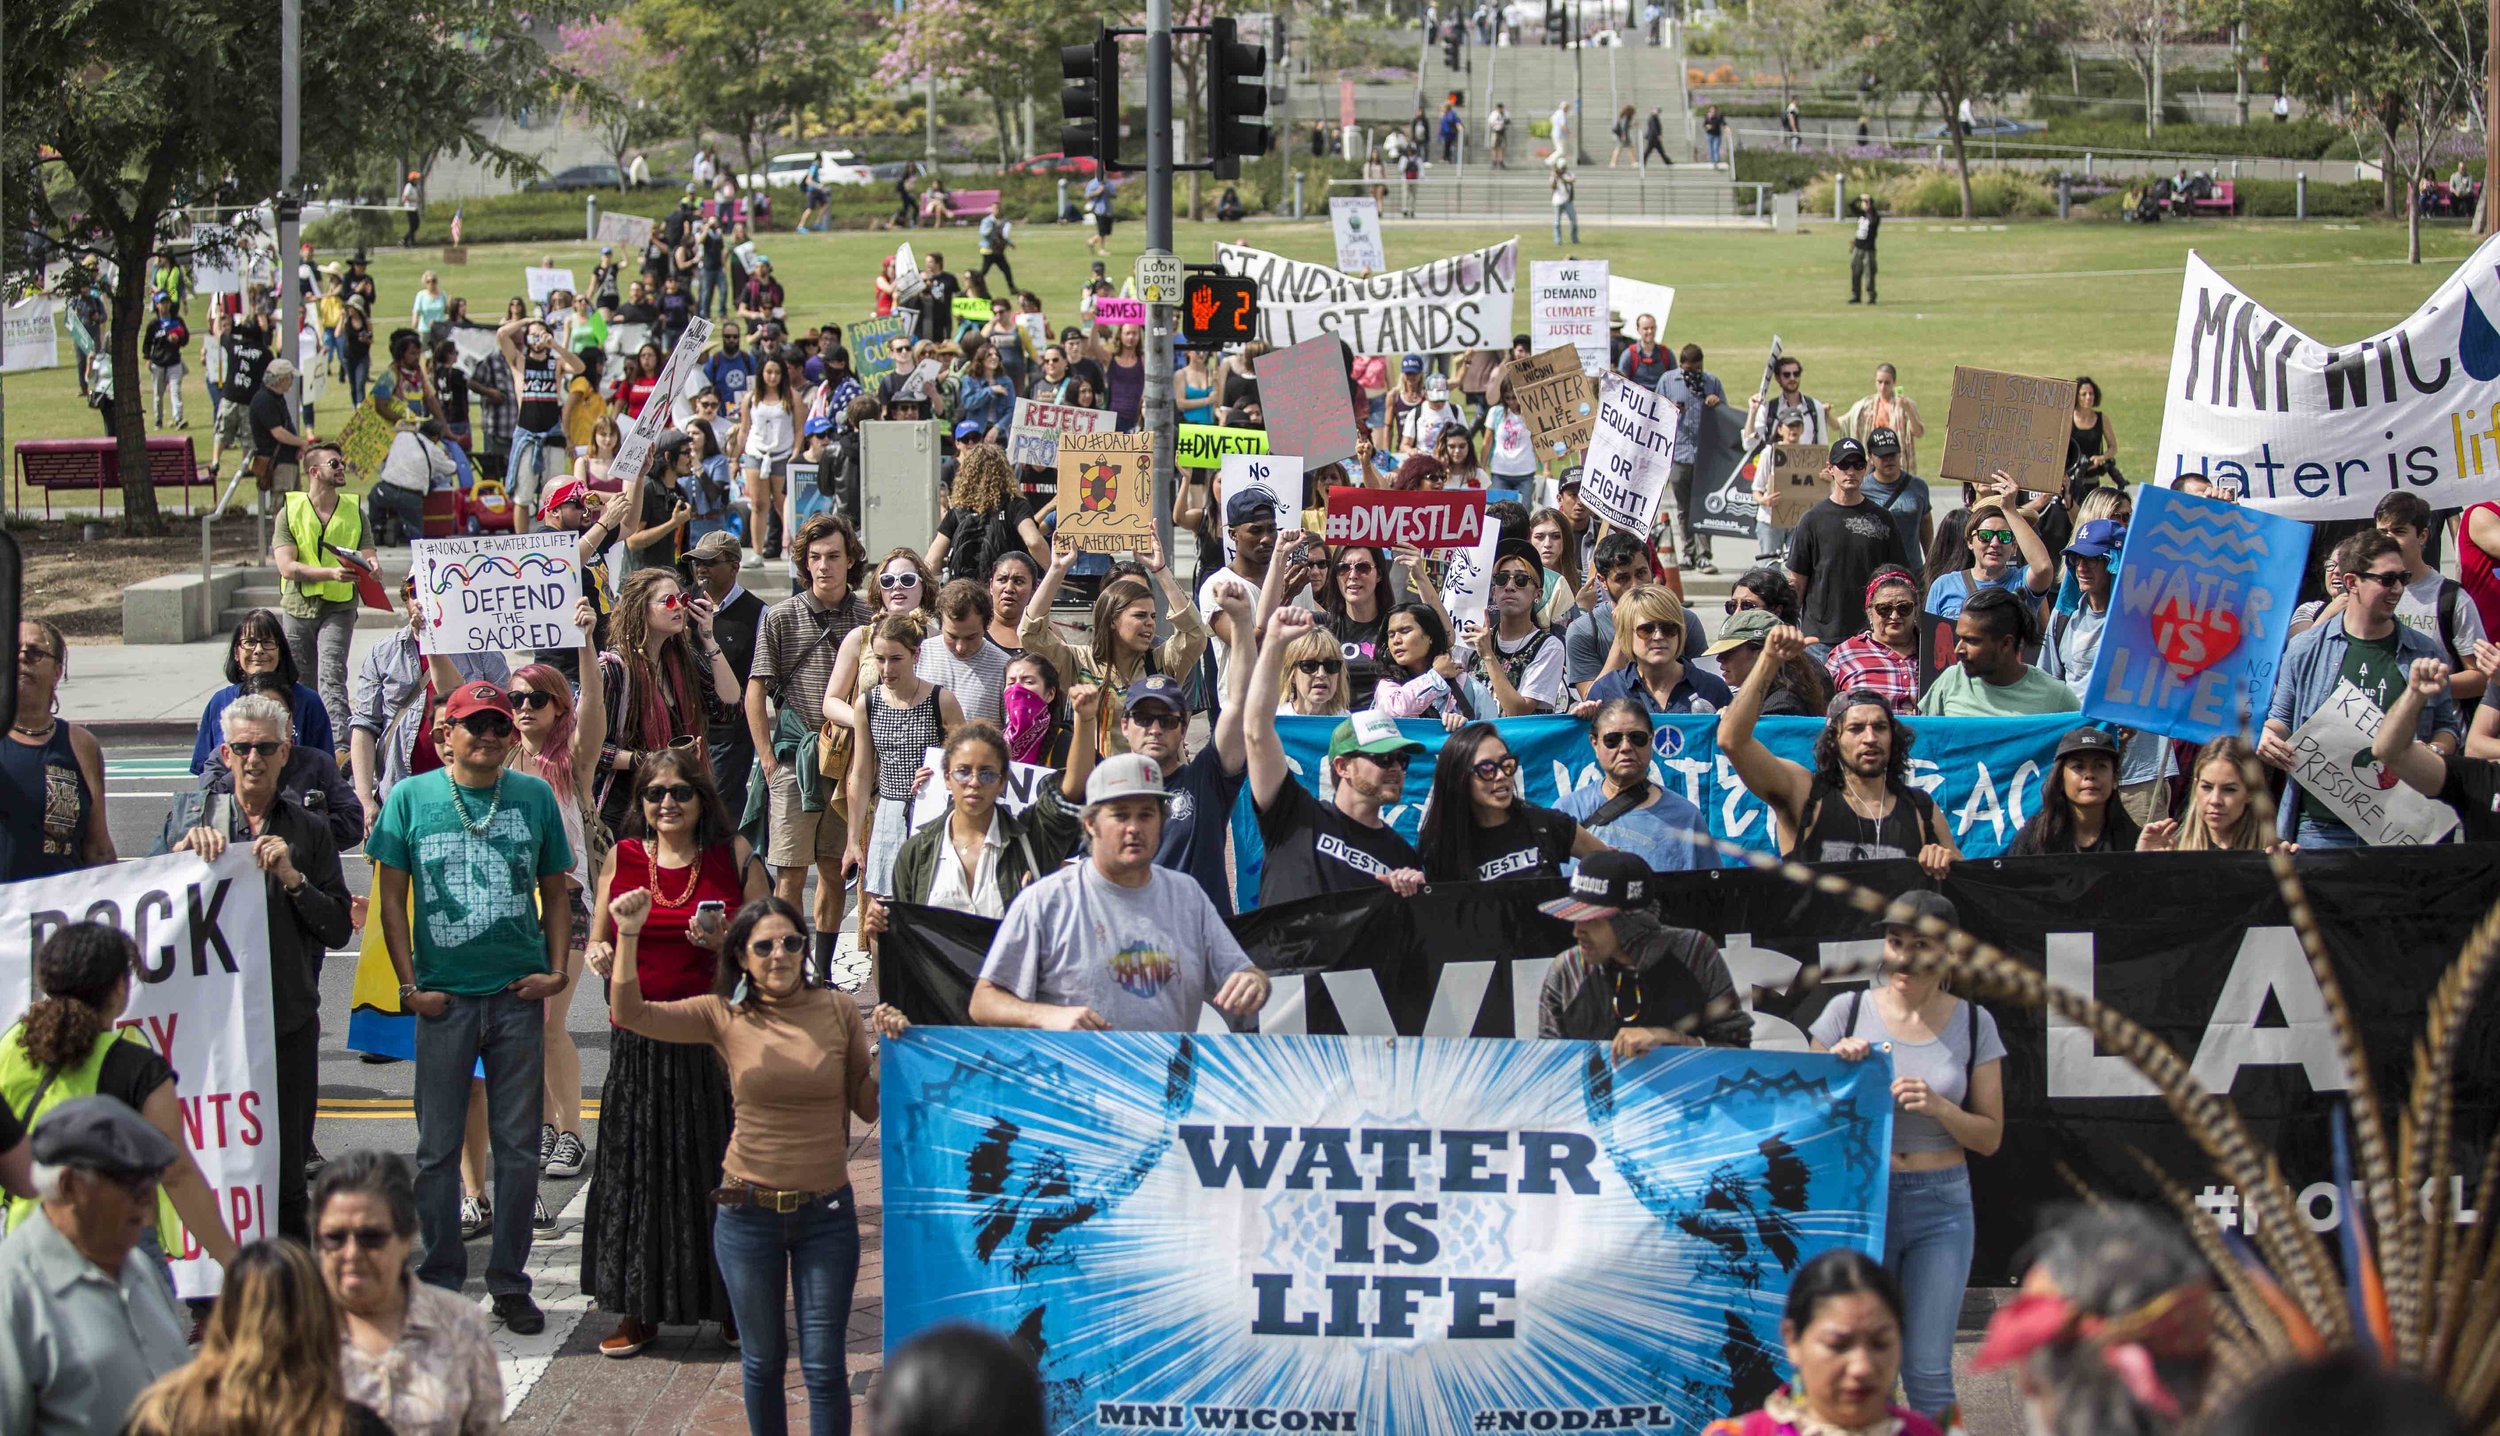  A coalition of activist groups carrying signs and chanting slogans who marched in opposition to the Dakota Access Pipeline finally arrive to Los Angles City Hall in downtown Los Angeles Calif., on Friday, March 10, 2017. The group was calling on the